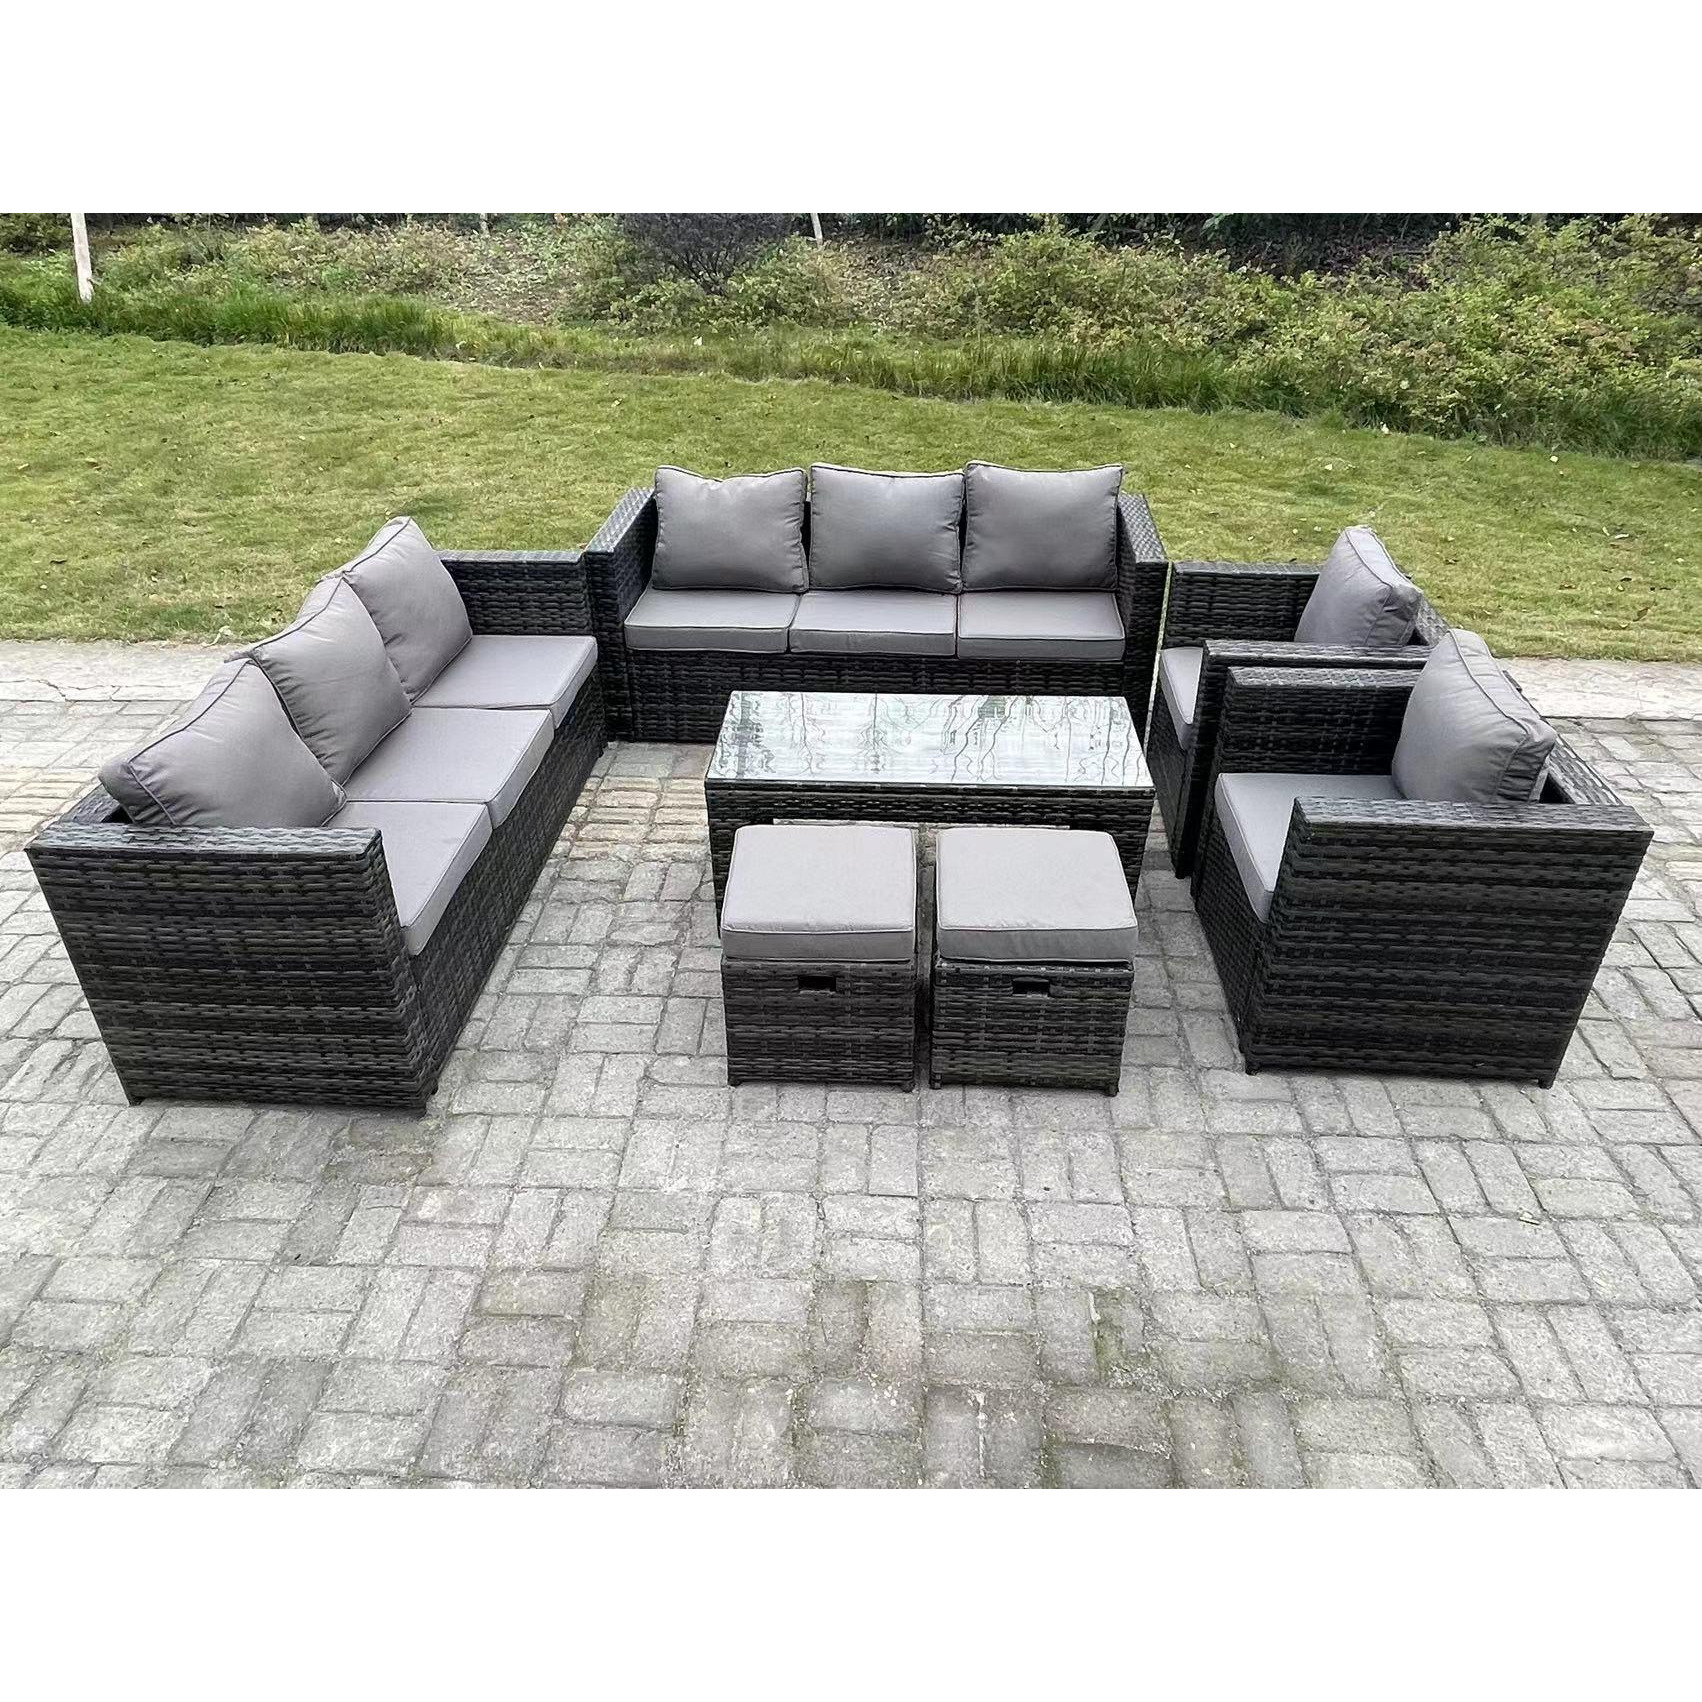 Outdoor Rattan Garden Furniture Lounge Sofa Set With Oblong Rectagular 2 PC Arm Chair - image 1